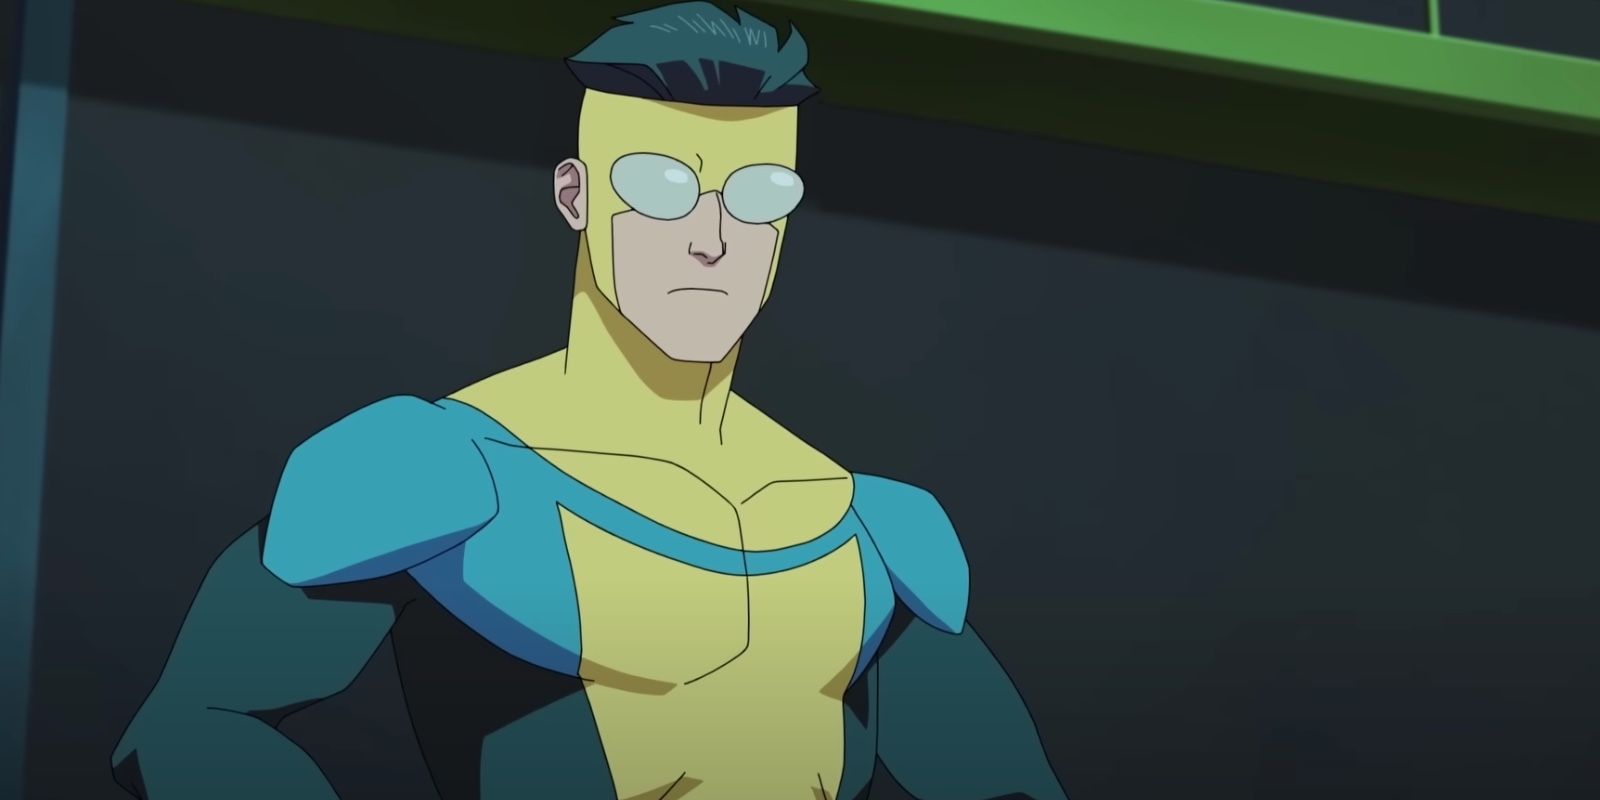 Invincible Season 2 Release Schedule - When New Episodes Air on